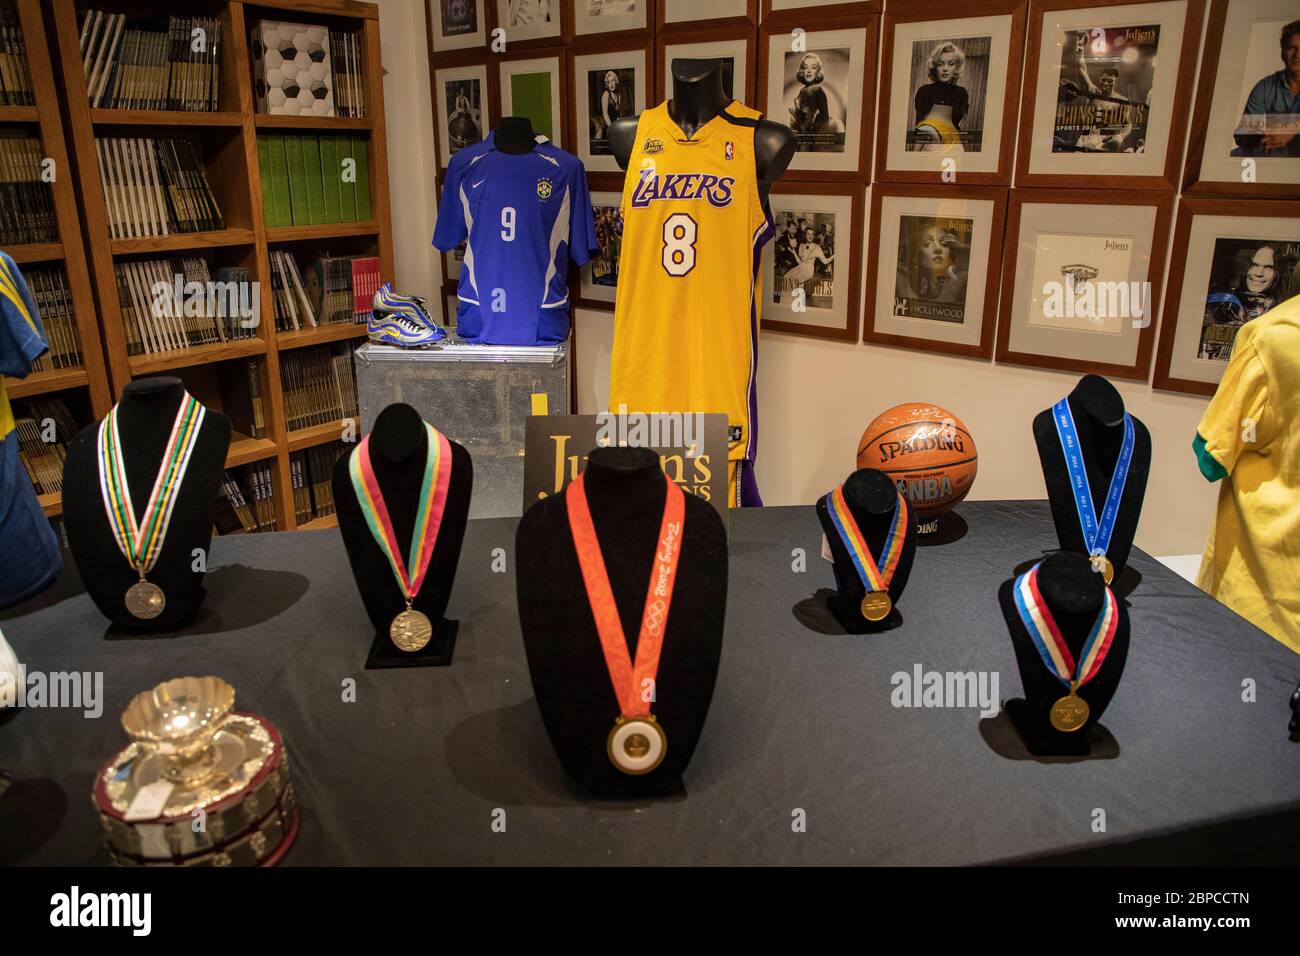 Culver City, USA. 18th May, 2020. Sports Legends featuring Lakers